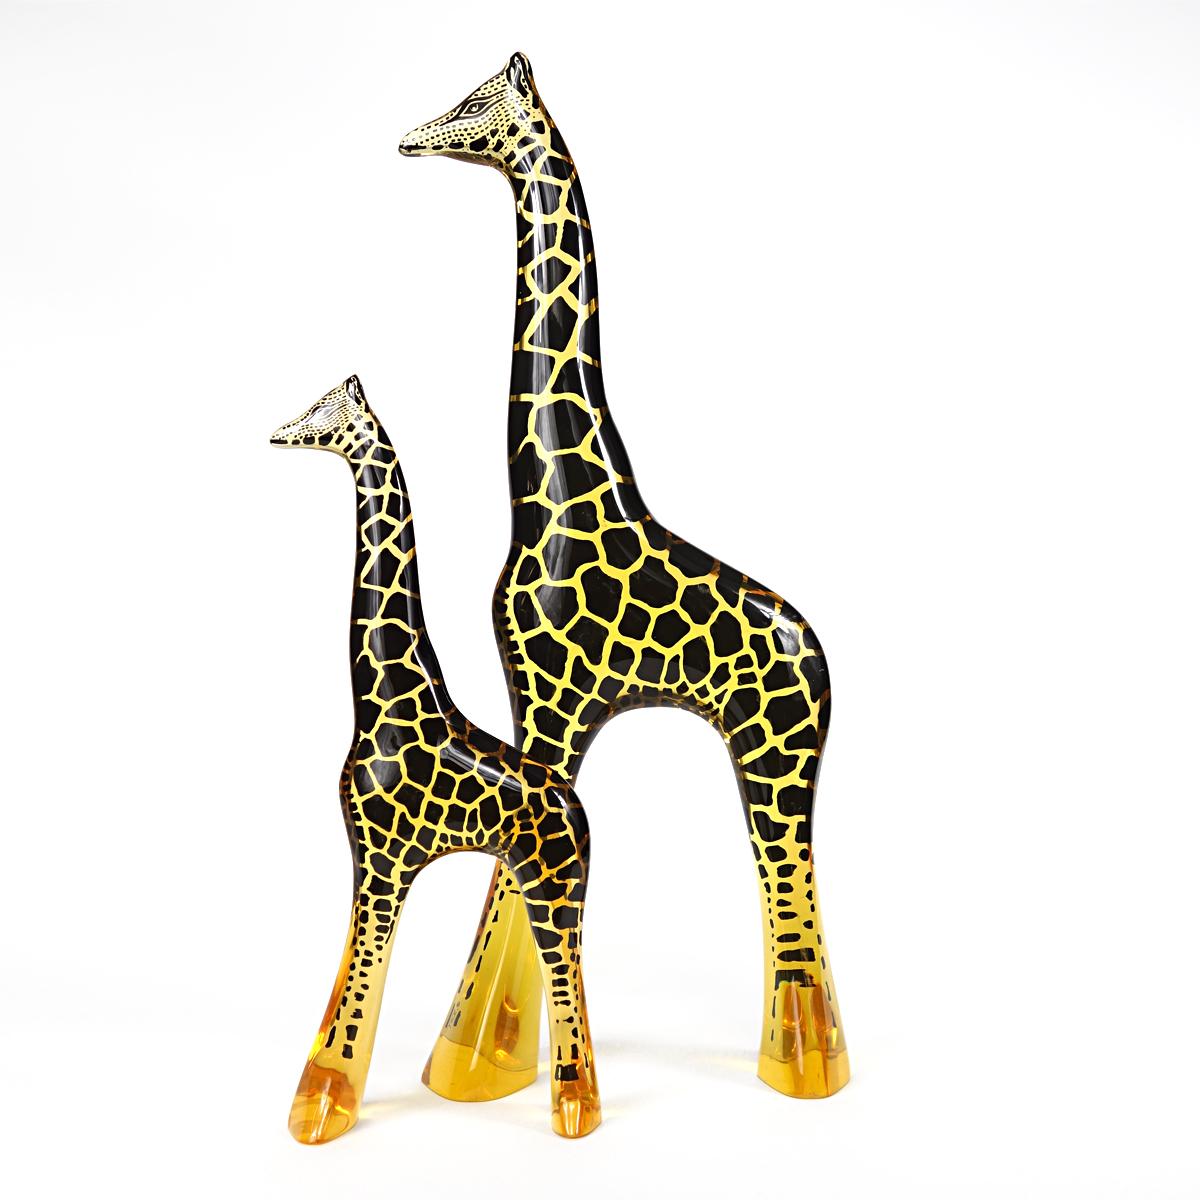 Very rare: a Palatnik animal figurine of half a meter high.
This giraffe truly is a showpiece in any room.
Almost new, it comes from the unpacked inventory of a store selling design pieces.